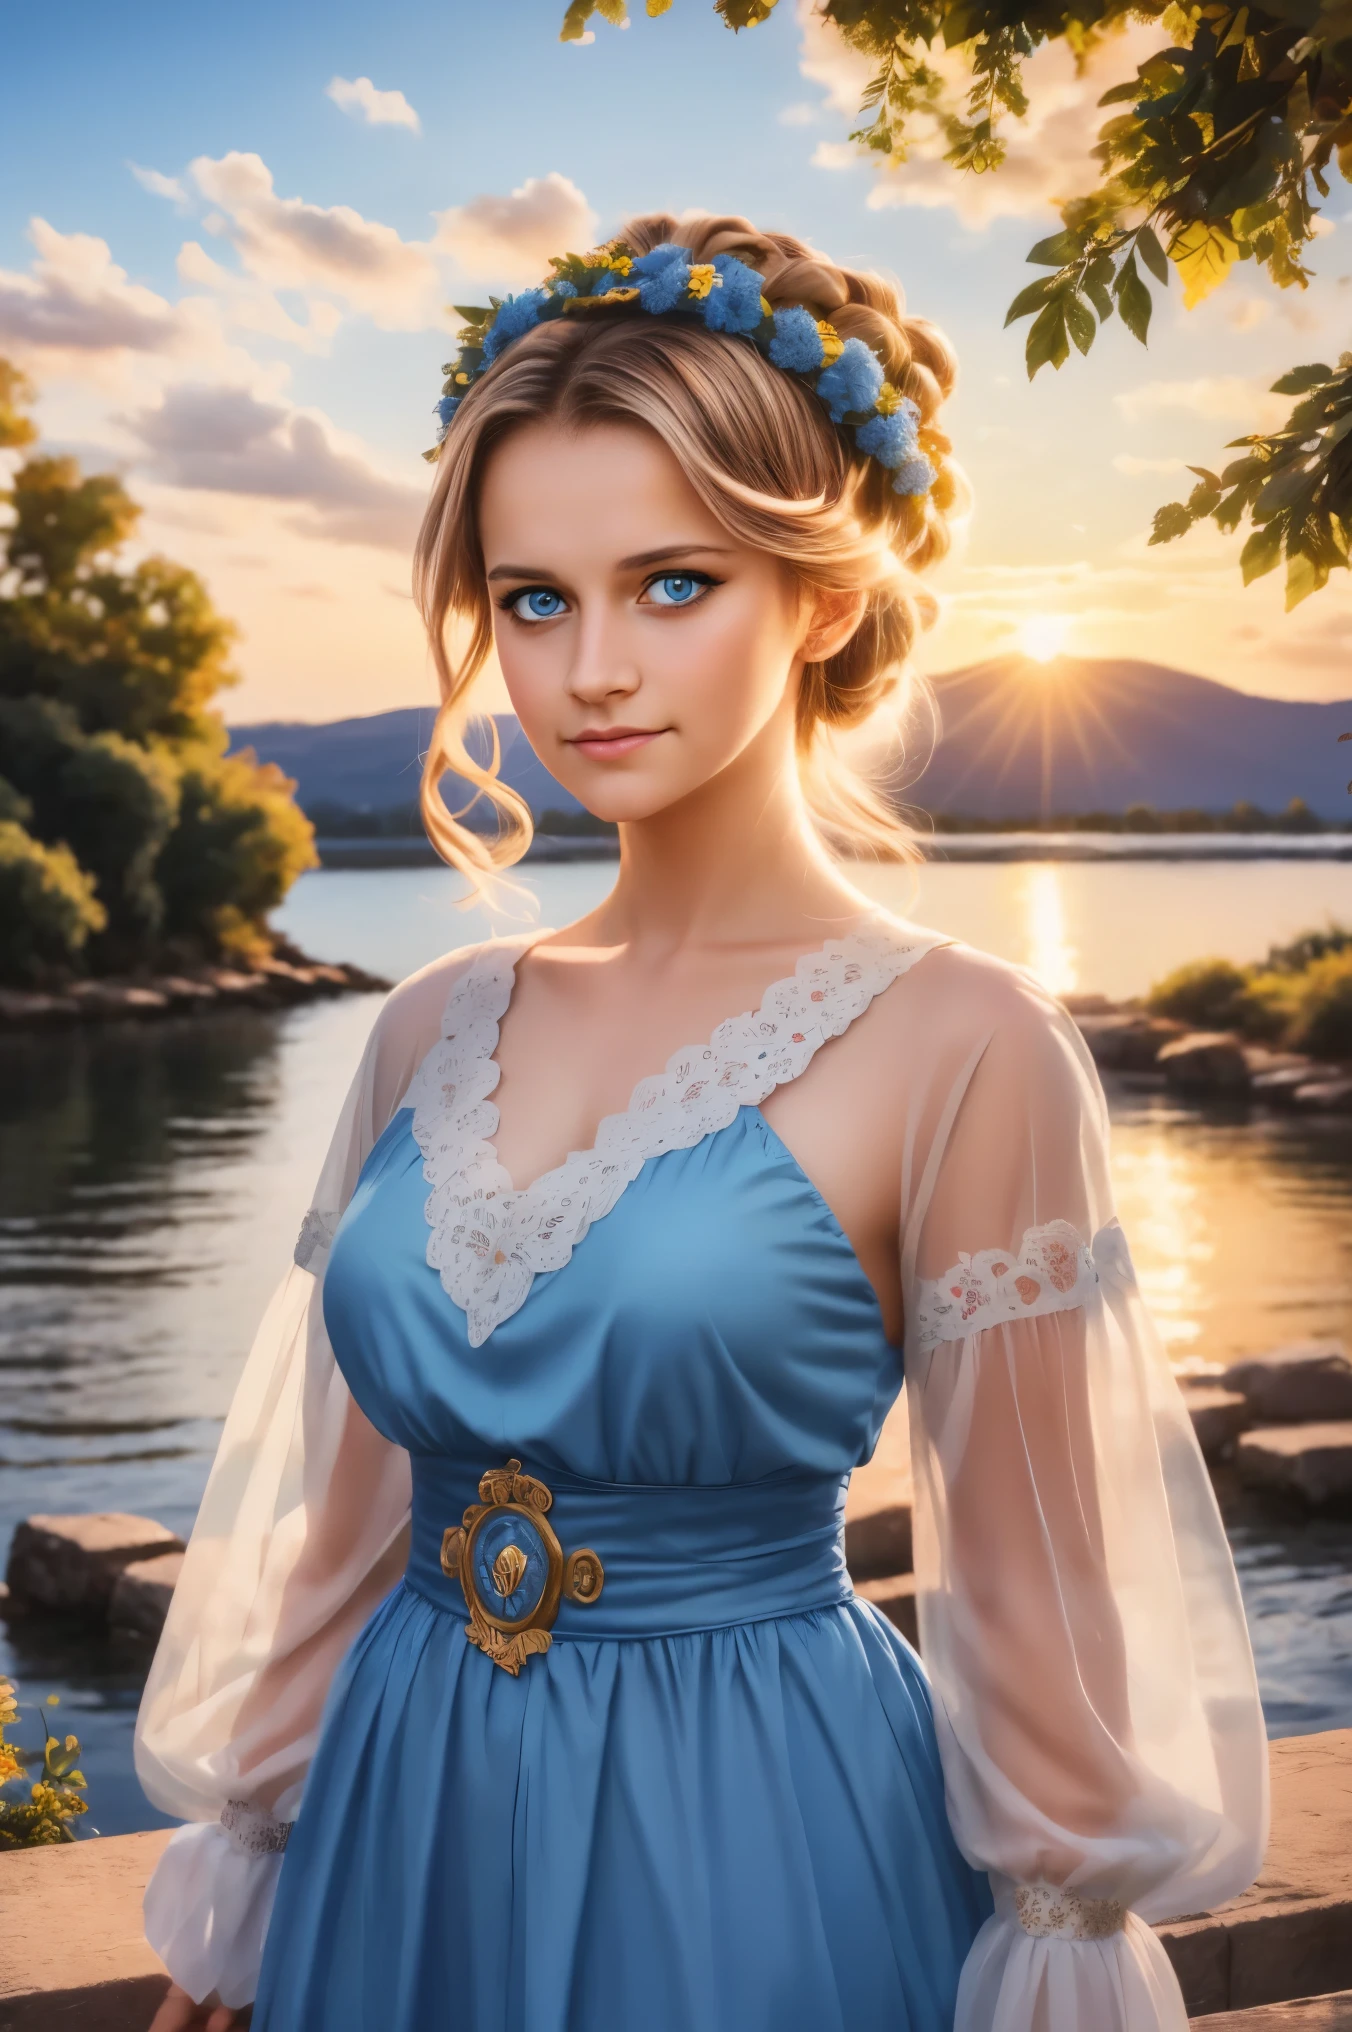 20 year old woman in Ukrainian costume Corolla wreath wearing wreath on head Blue eyes River and blue sky in background Afternoon light sunset realistic illustration